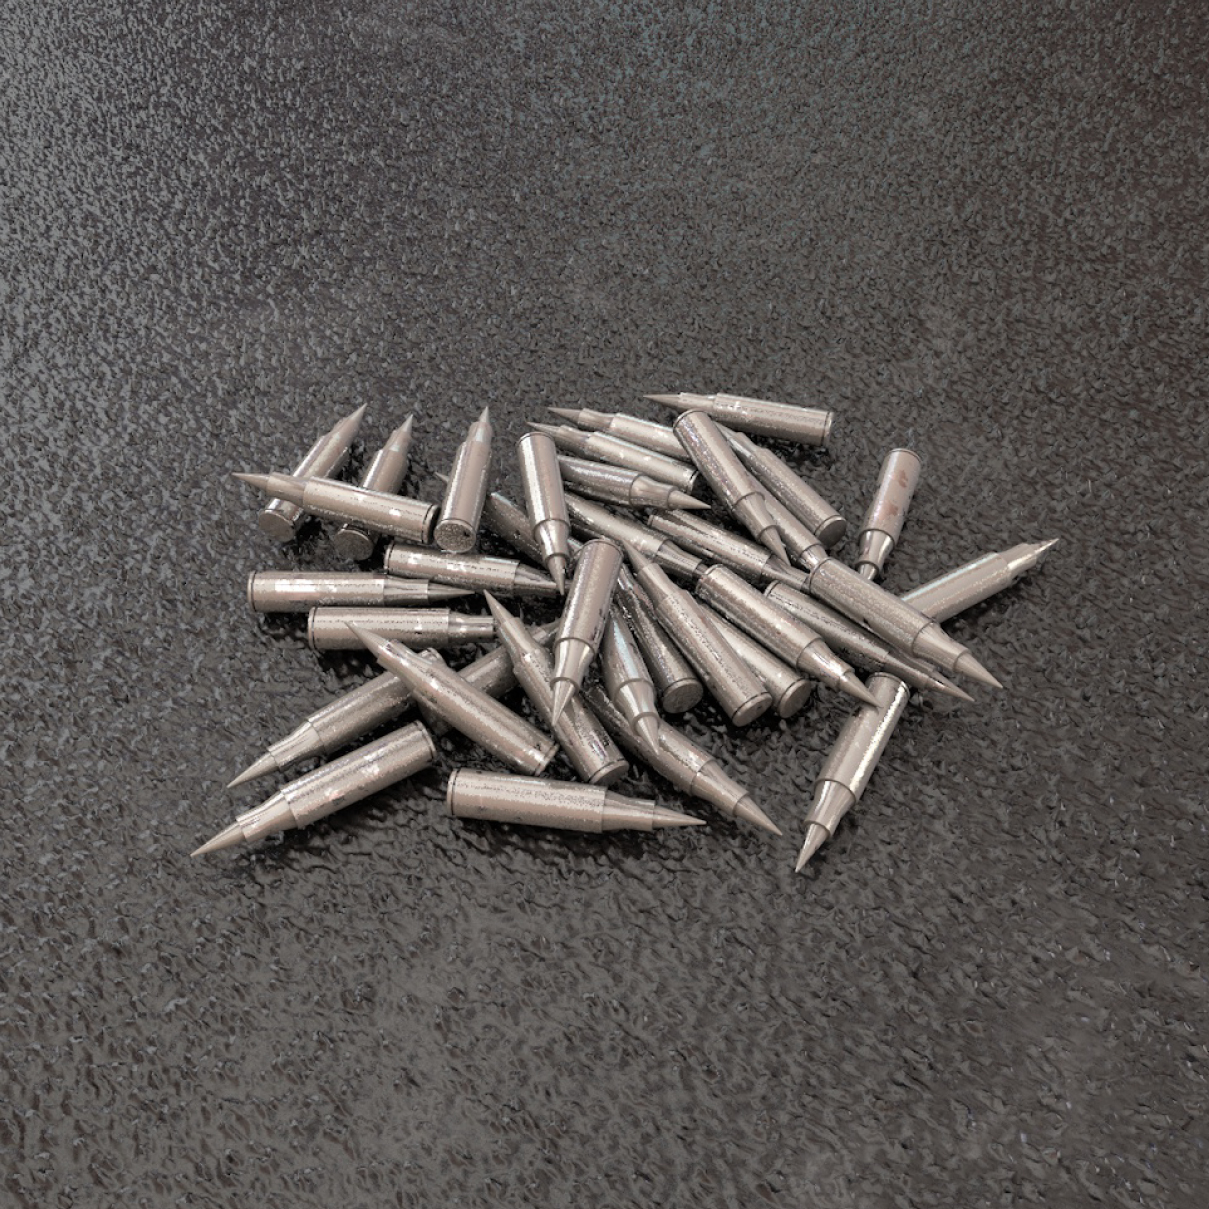 Modelling & Texturing bullets in Cinema 4D Part-1